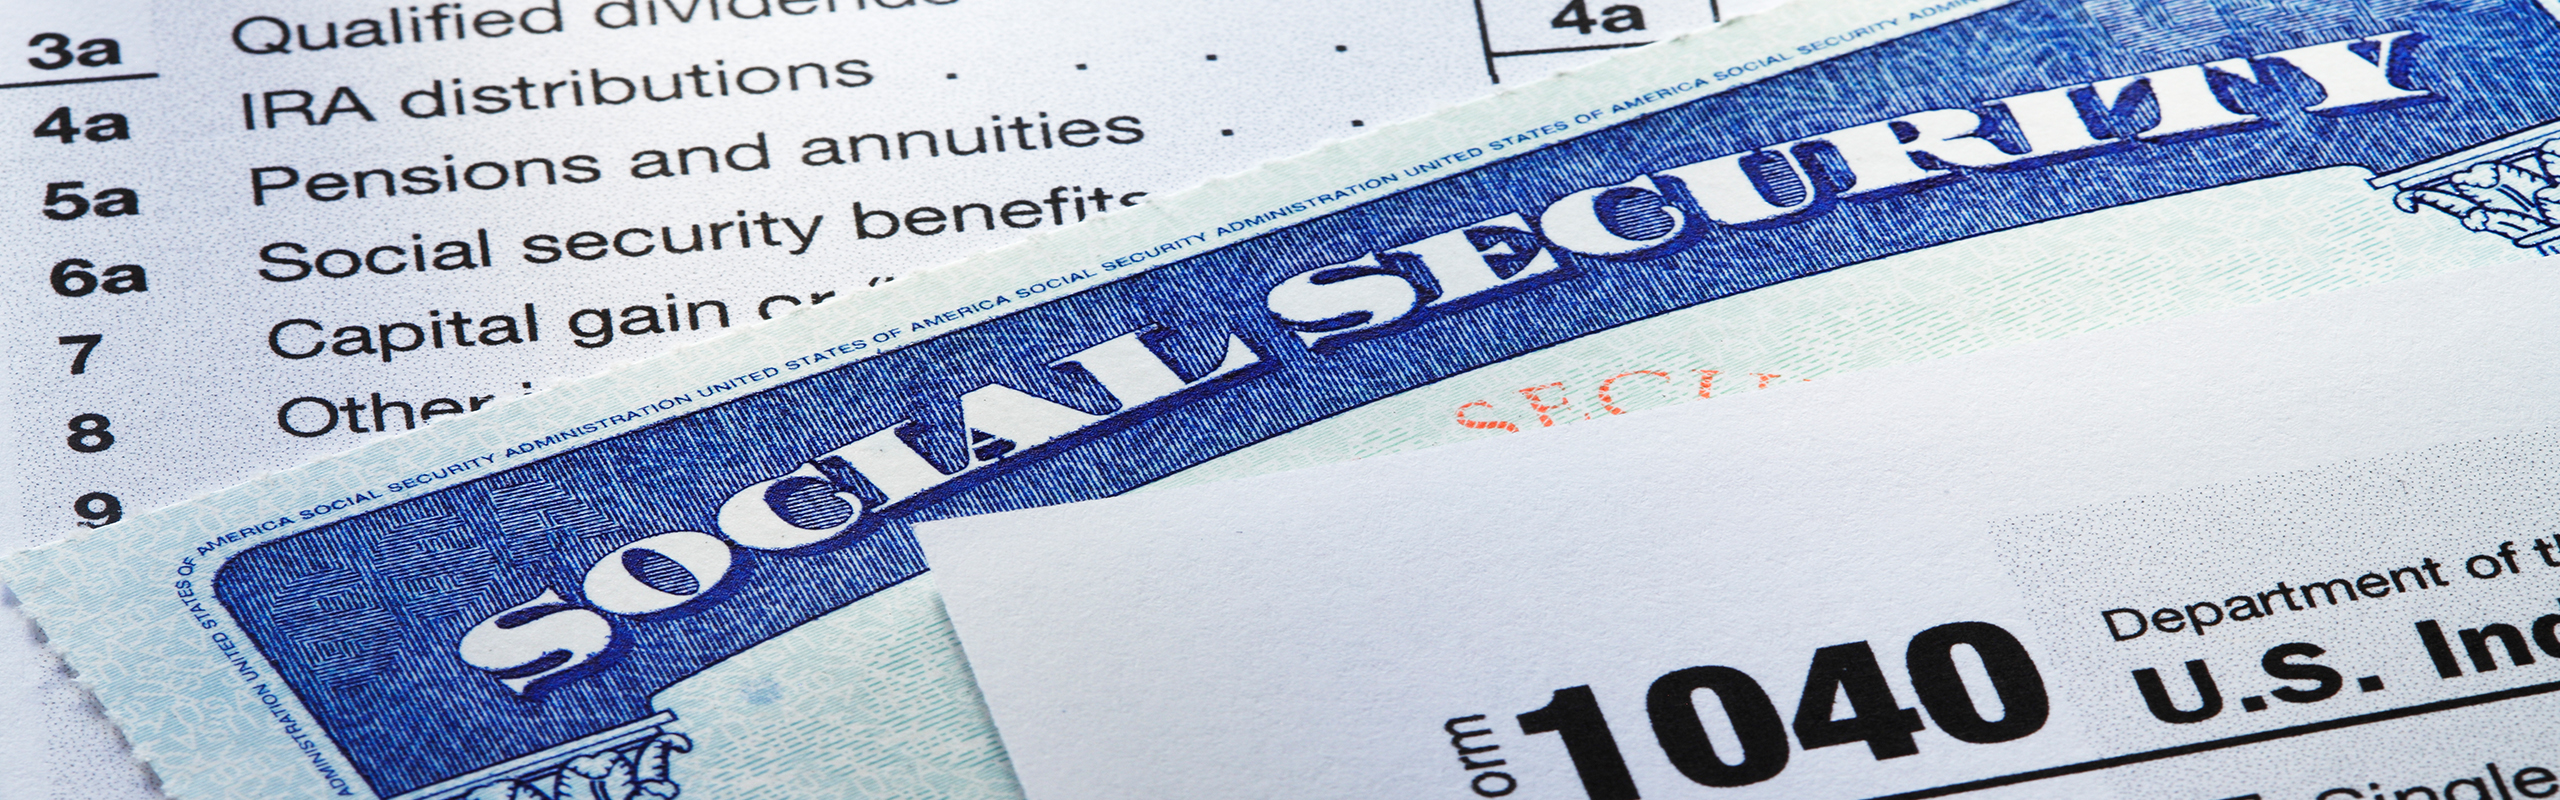 Social security wage base increases